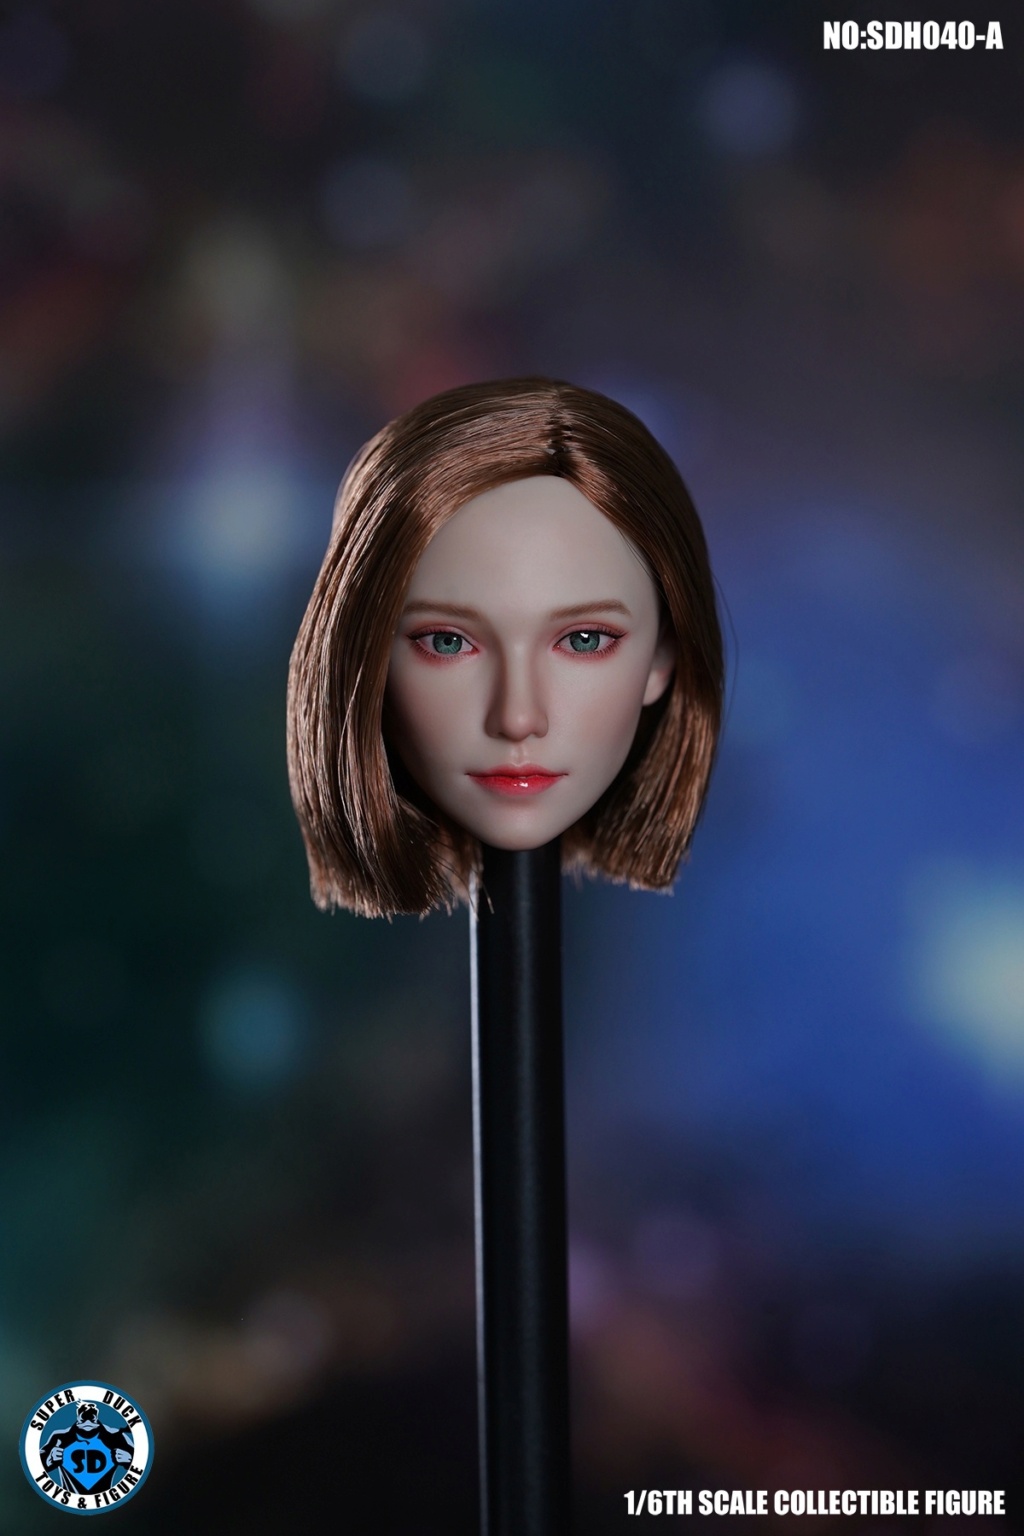 superduck - NEW PRODUCT: Super Duck: 1/6 SDH040 Mixed-Blood Female Head Sculpture - AB C. D Four Styles 15581810